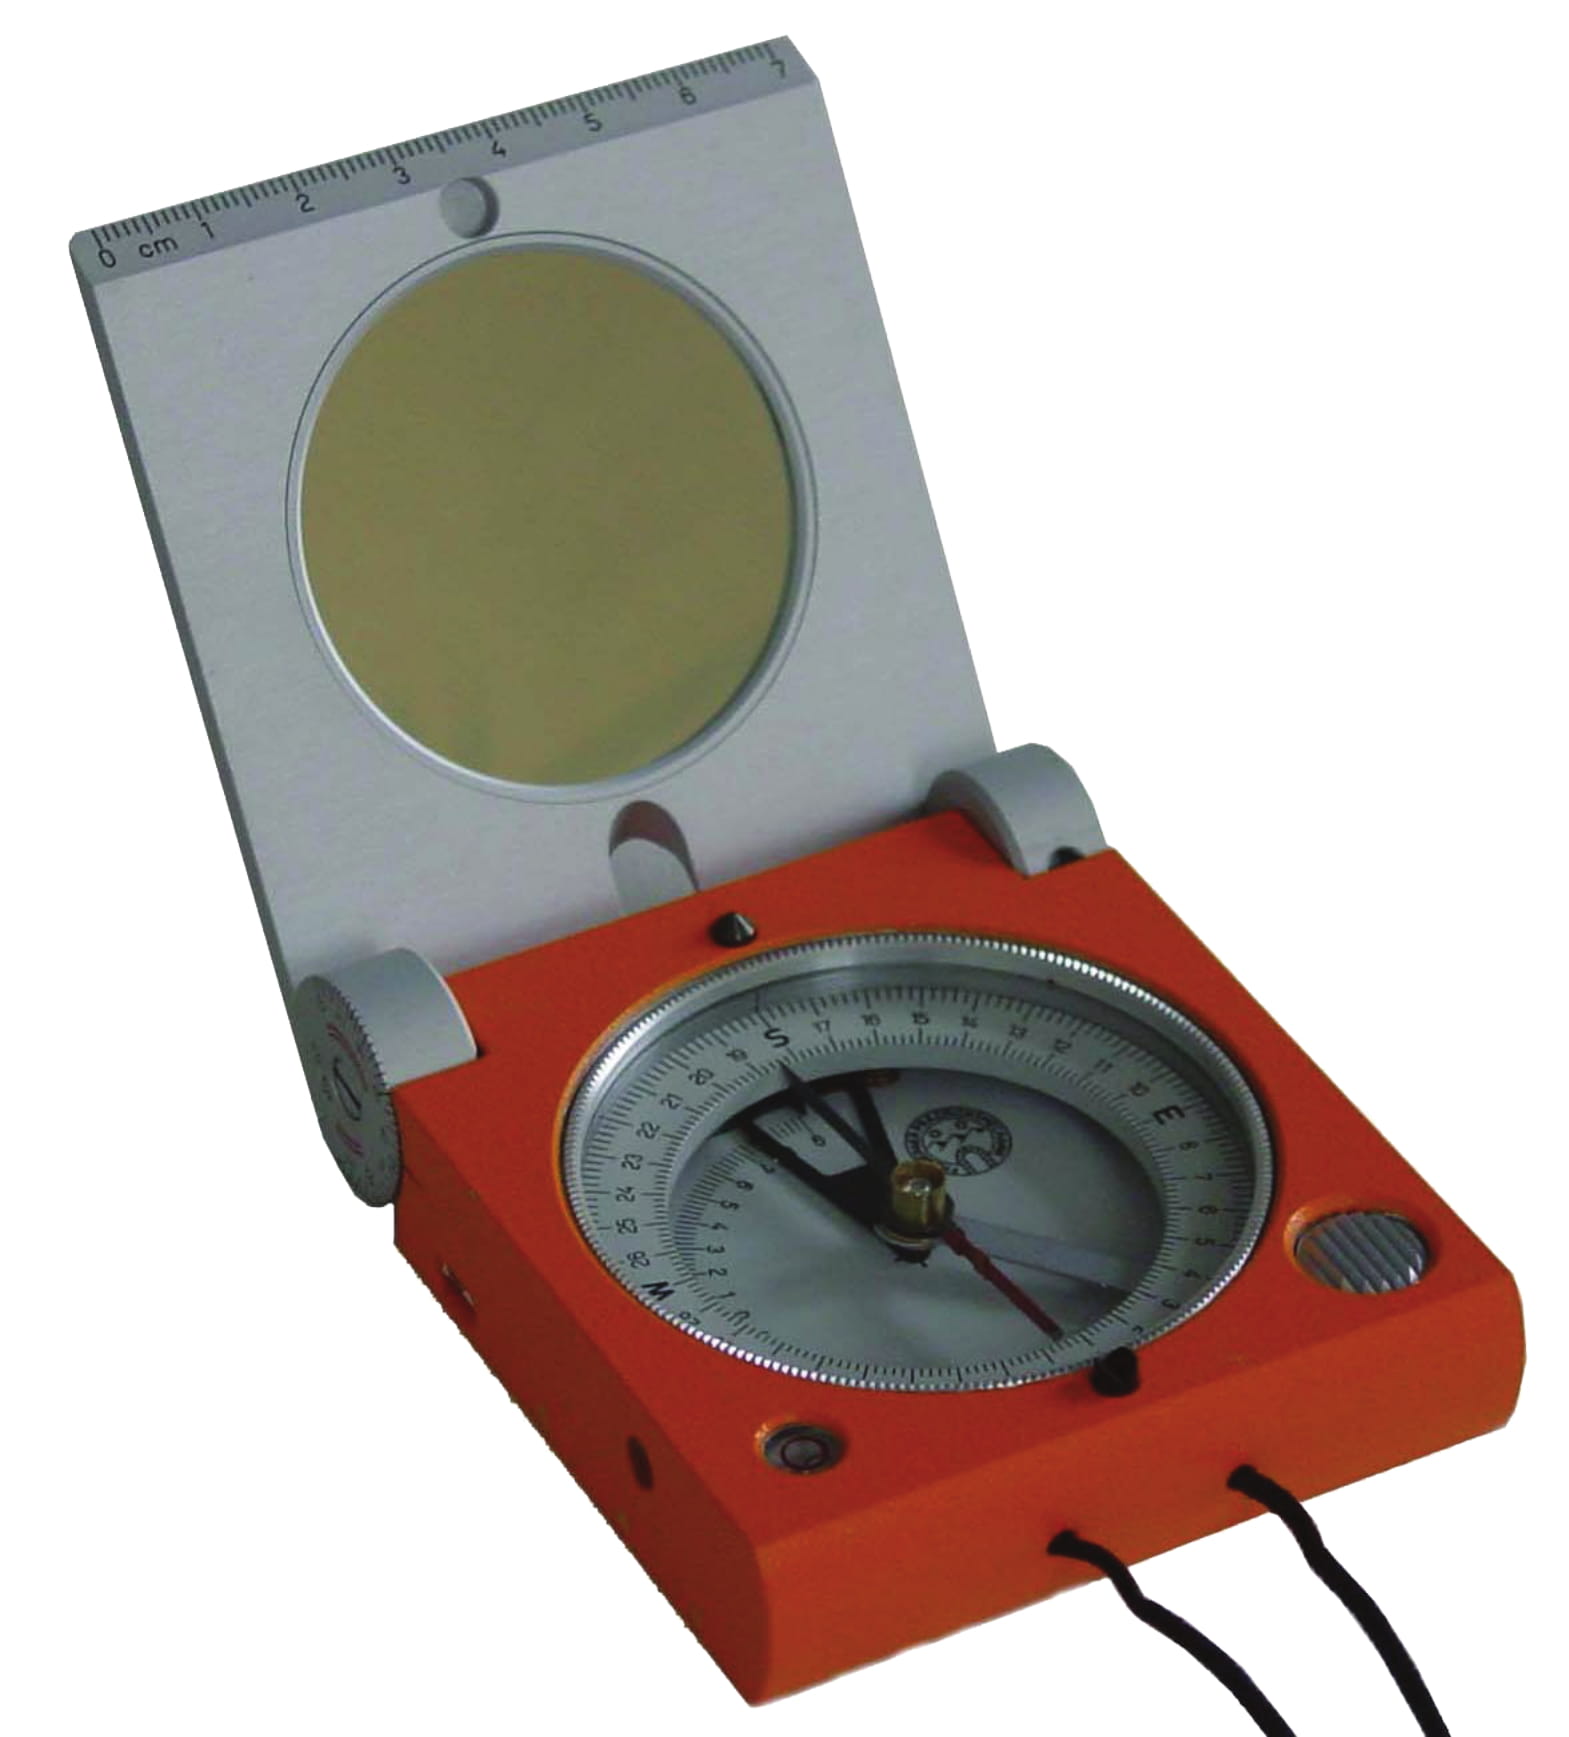 Freiberg Geologist's Compass with mirror